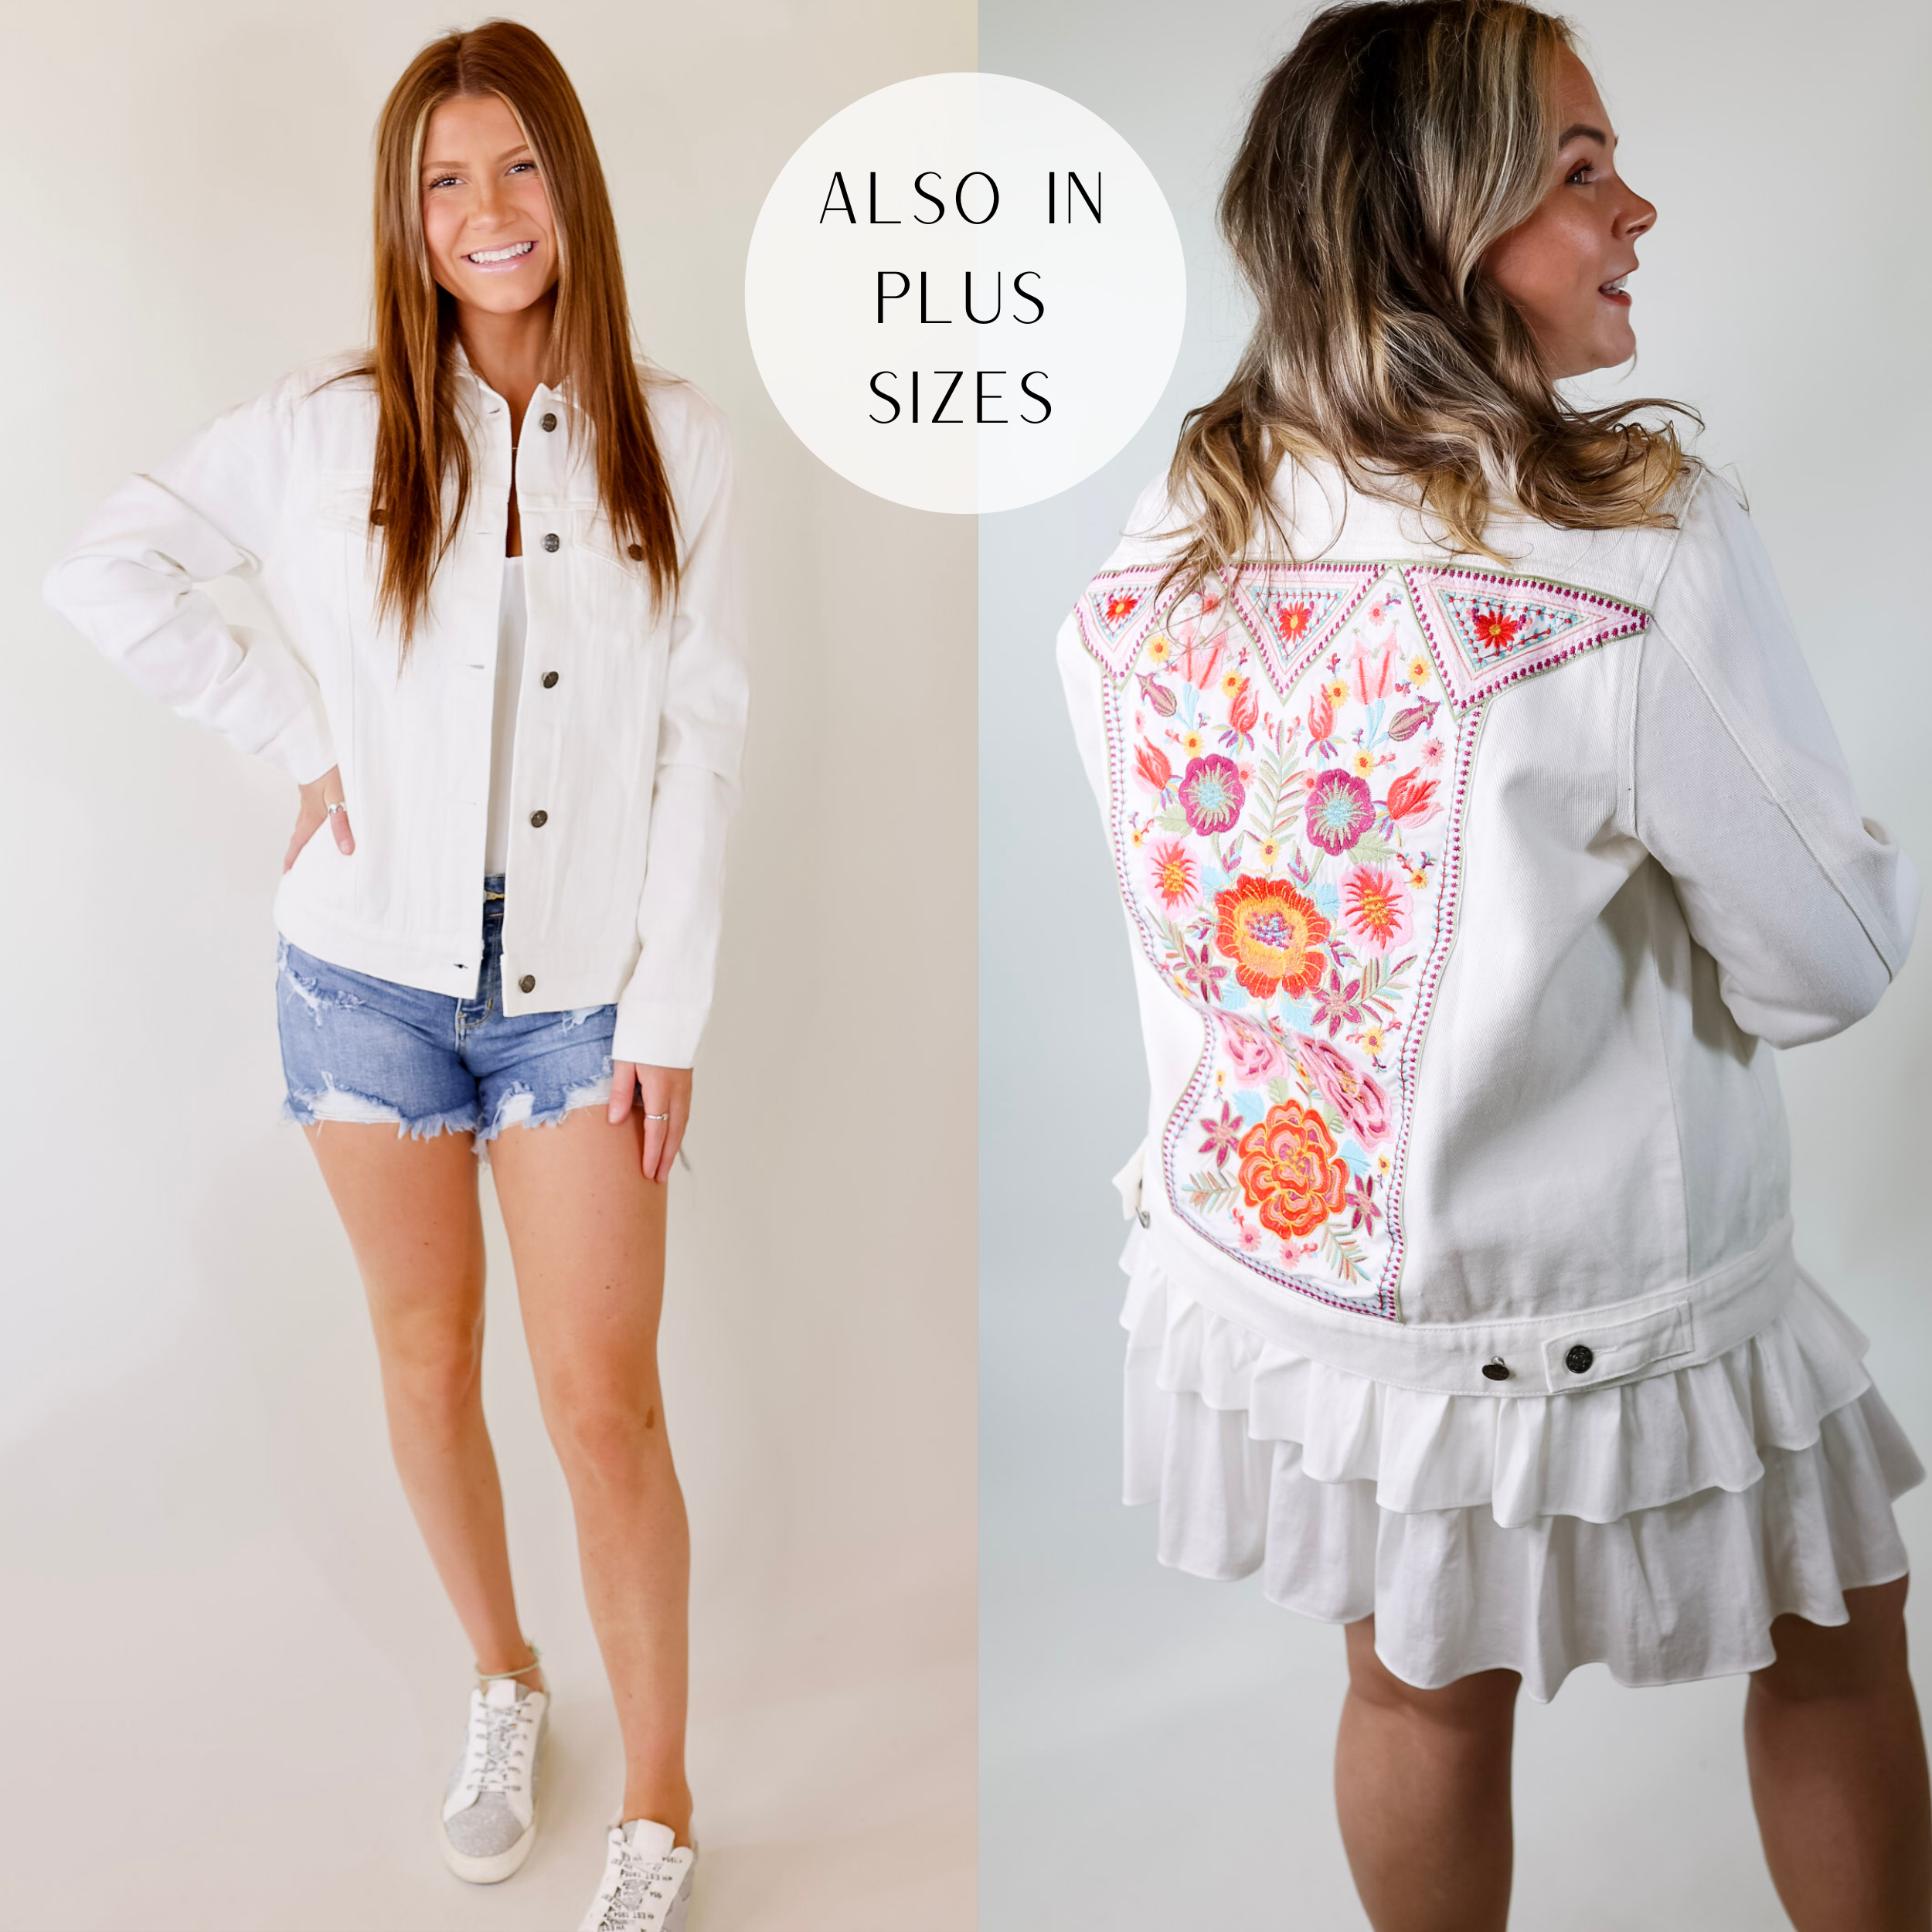 Models are wearing a white denim jacket featuring multicolor floral embroidery on the back.